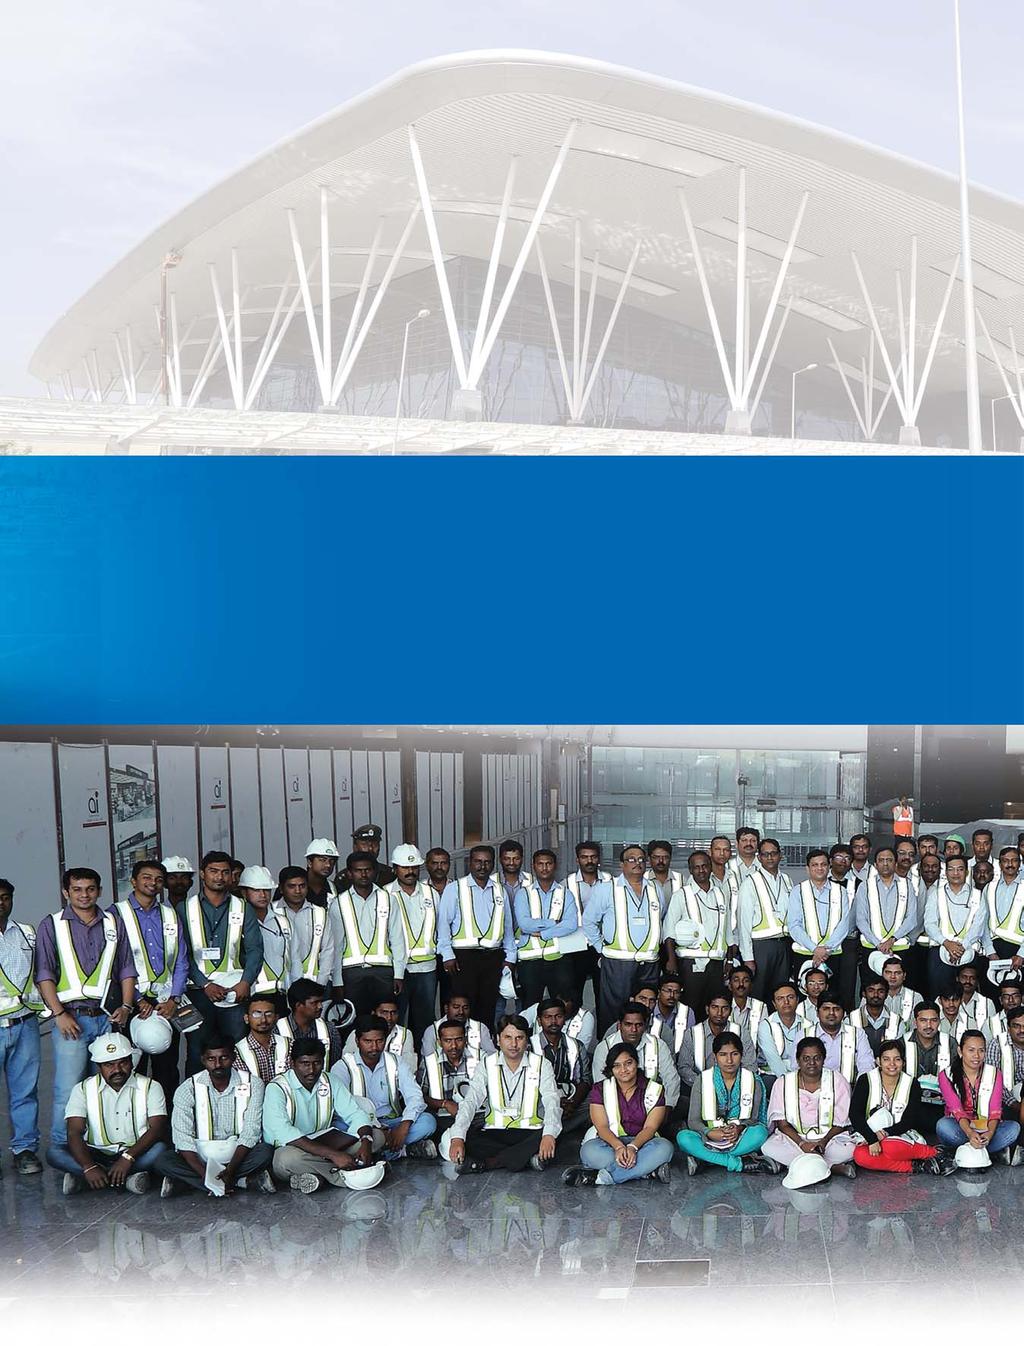 Team L&T at BIAL People at project sites are the prime movers in L&T who strive relentlessly to achieve the milestones and shape the engineering marvels that define L&T s Imagineering credo.